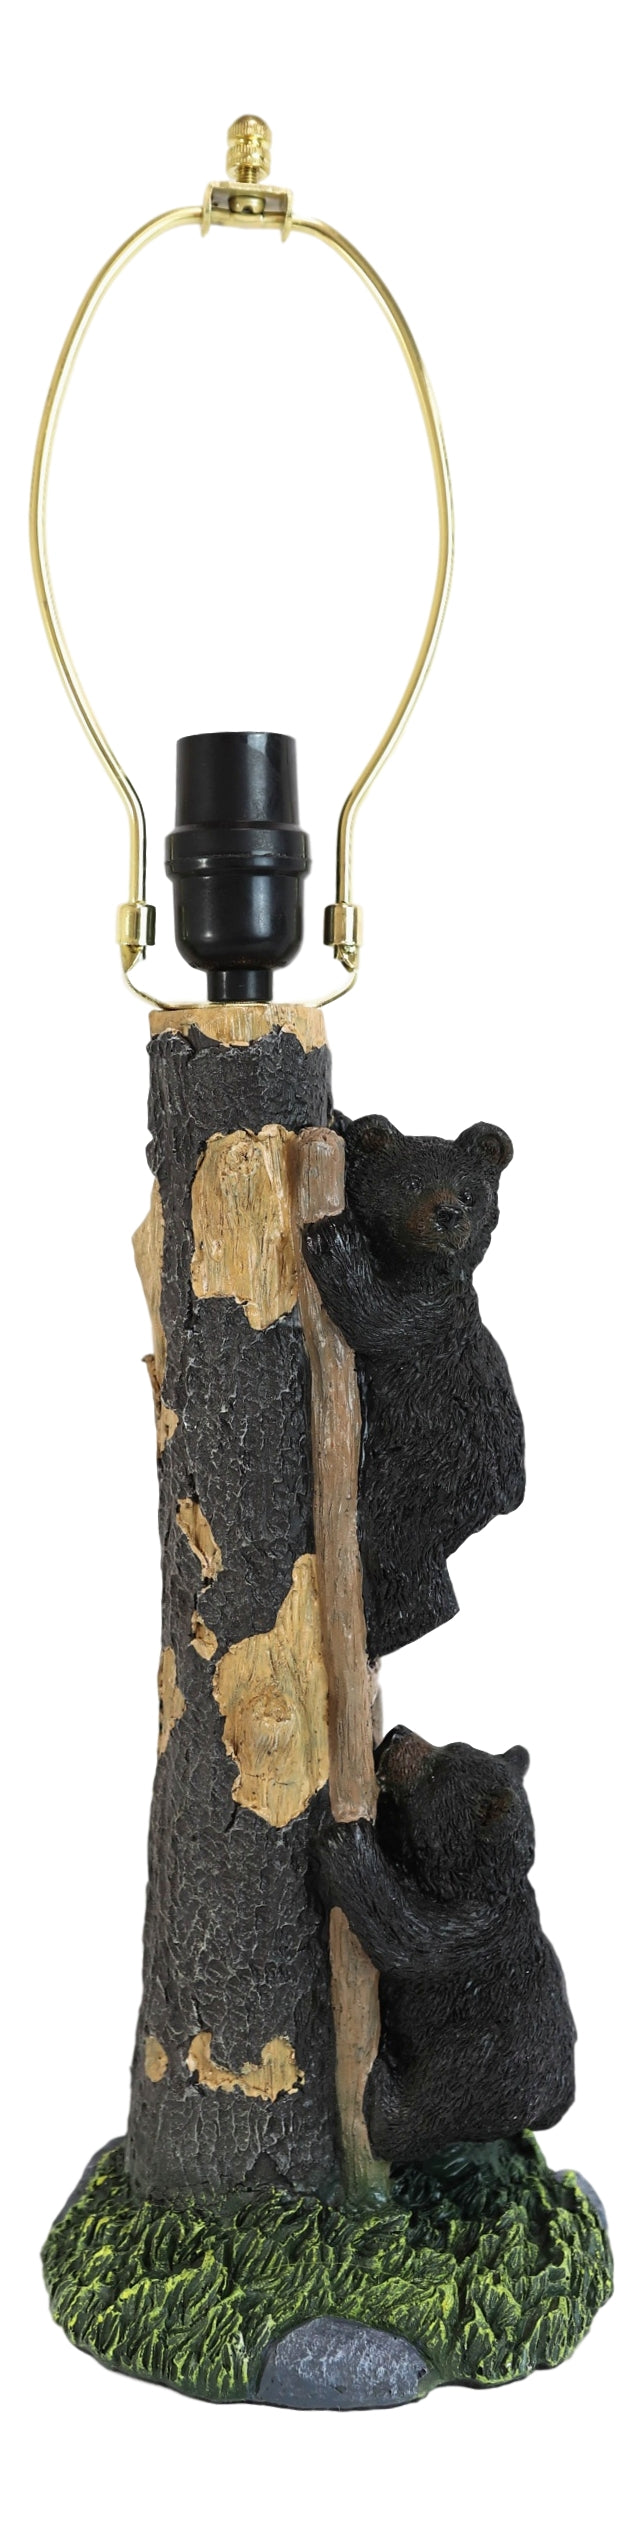 Rustic Forest 2 Bear Cubs Climbing Tree Ladder Table Lamp Statue with Shade 23"H